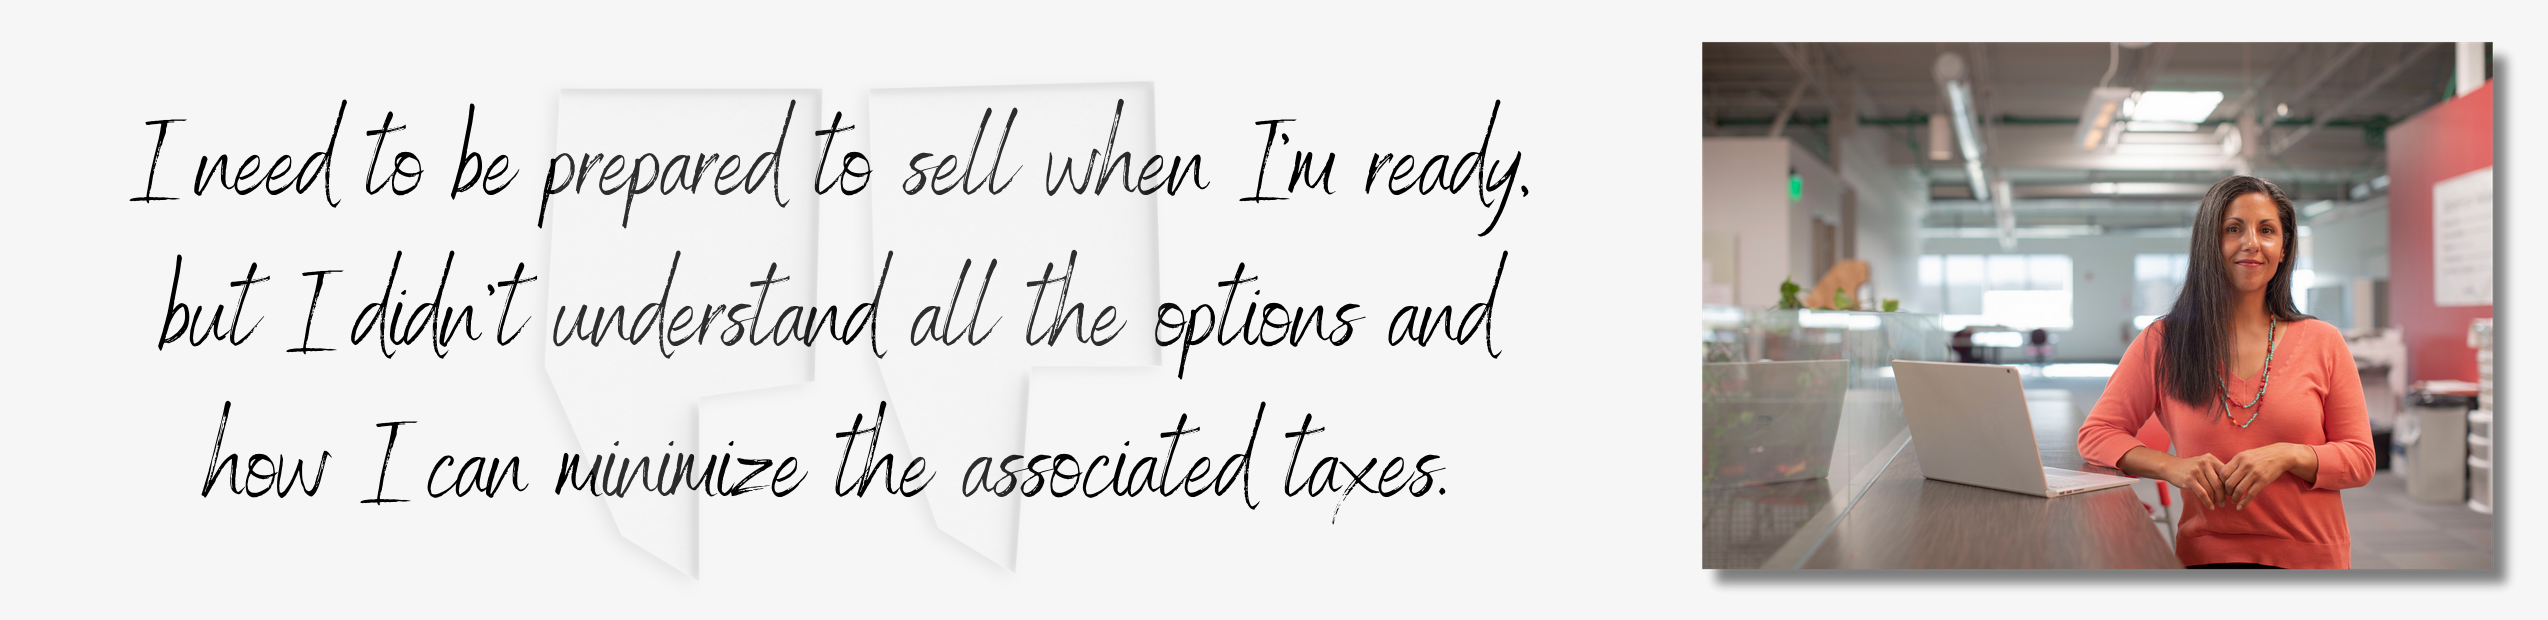 I need to be prepared to sell when I'm ready, but I didn't understand all the options and how I can minimize the associated taxes.